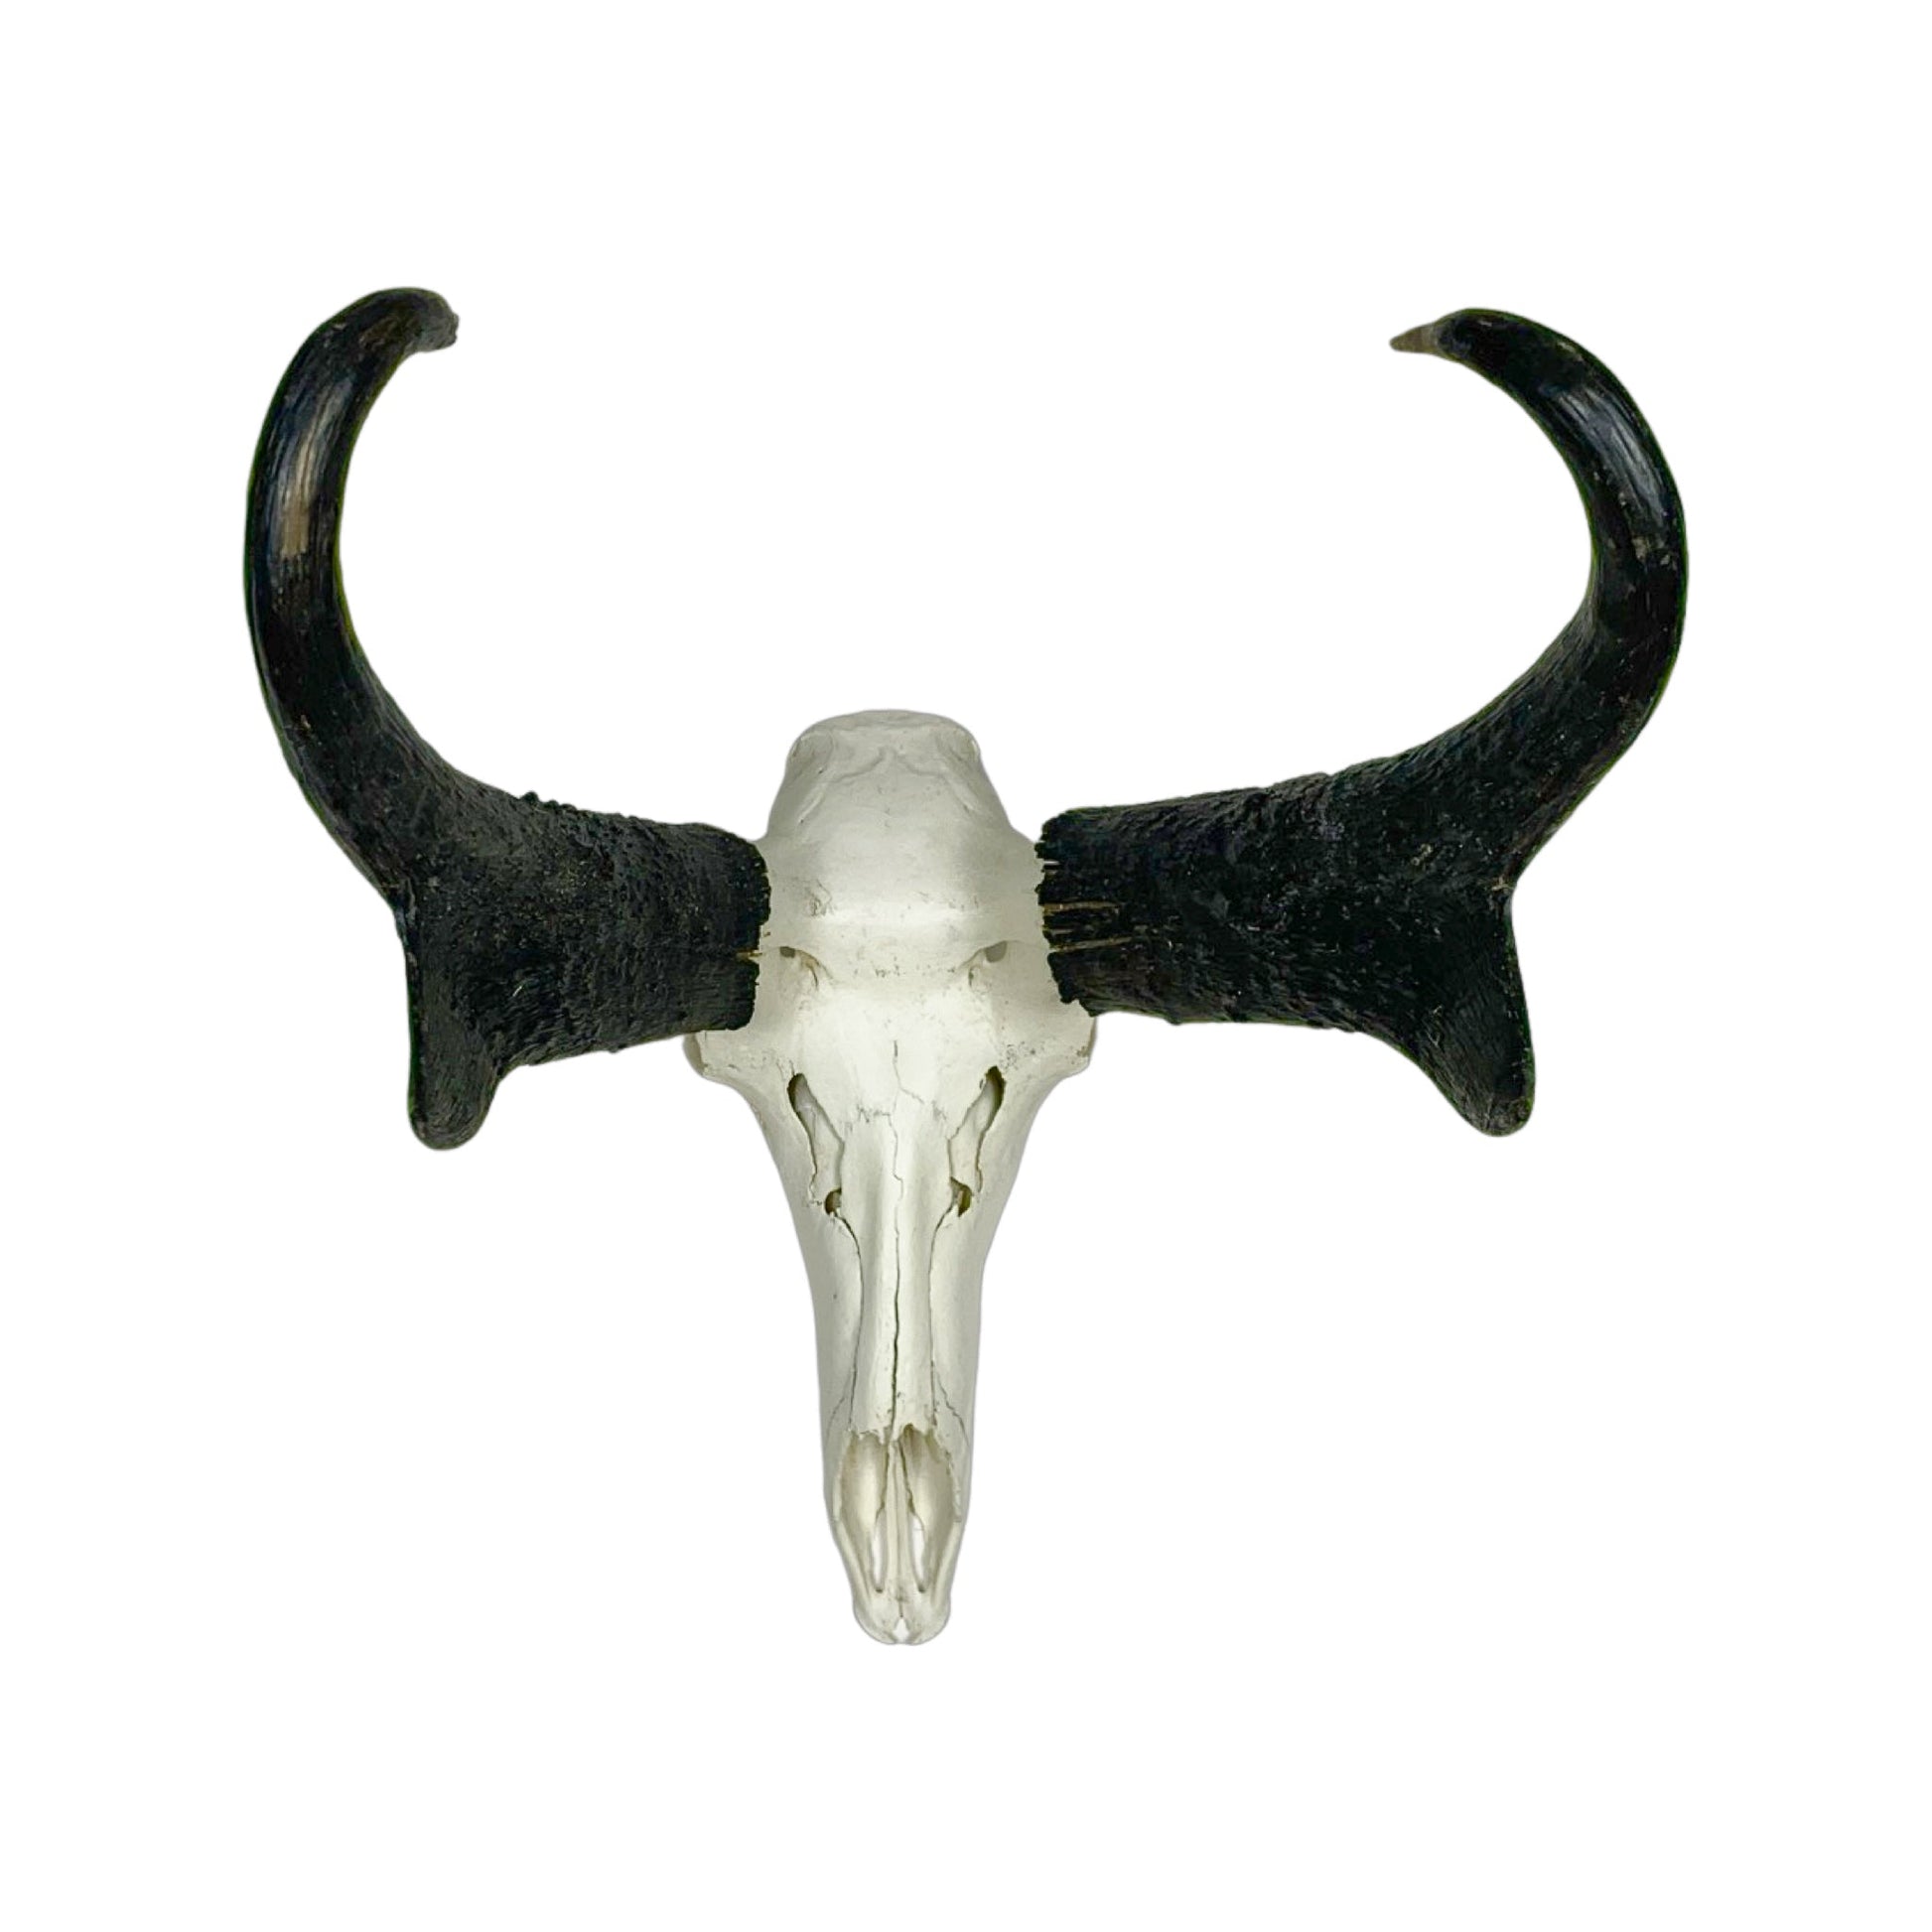 A Home Decor Taxidermy Pronghorn Skull of Grade Trophy